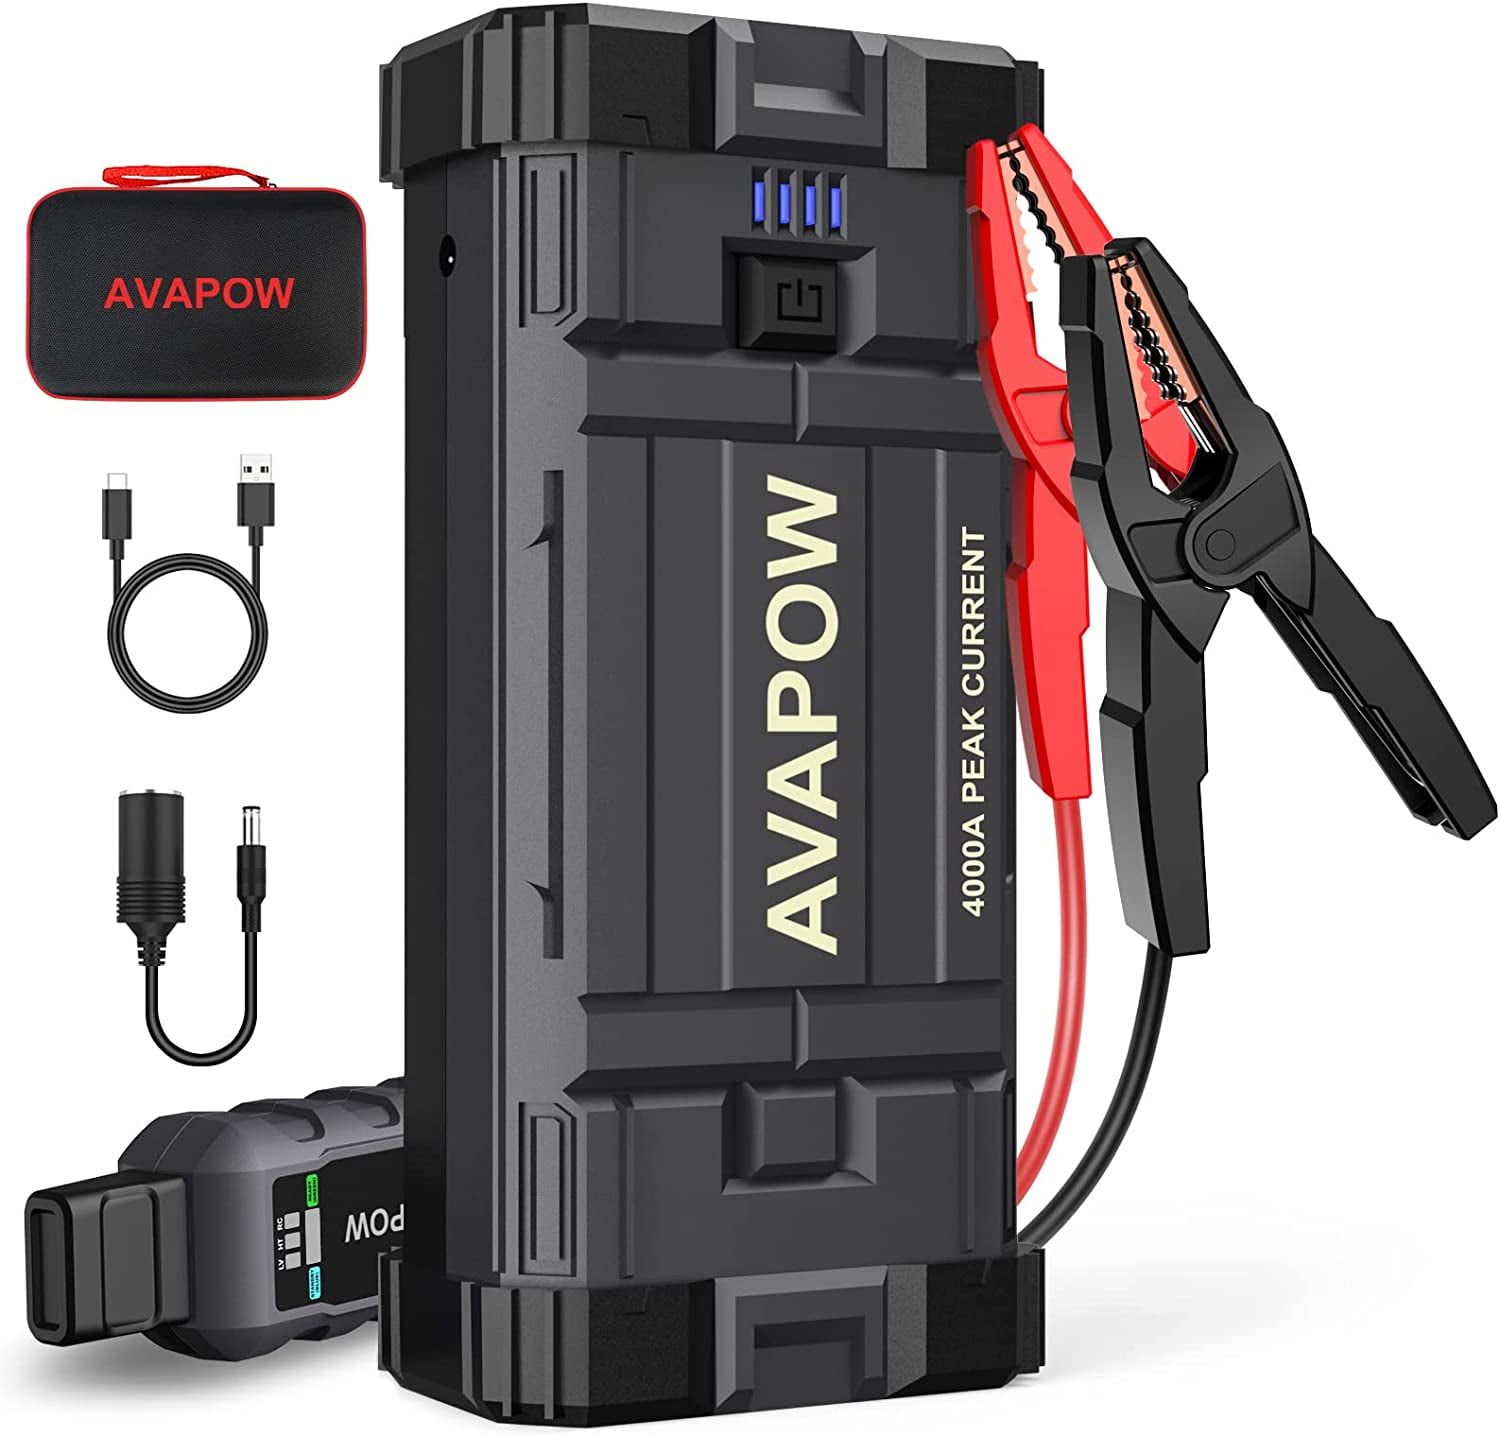 AVAPOW Car Jump Starter, 4000A Peak 27800mAh Battery Jump Starter (for All Gas or Up to 10L Diesel), Battery Booster Power Pack, 12V Auto Jump Box with LED Light, USB Quick Charge 3.0